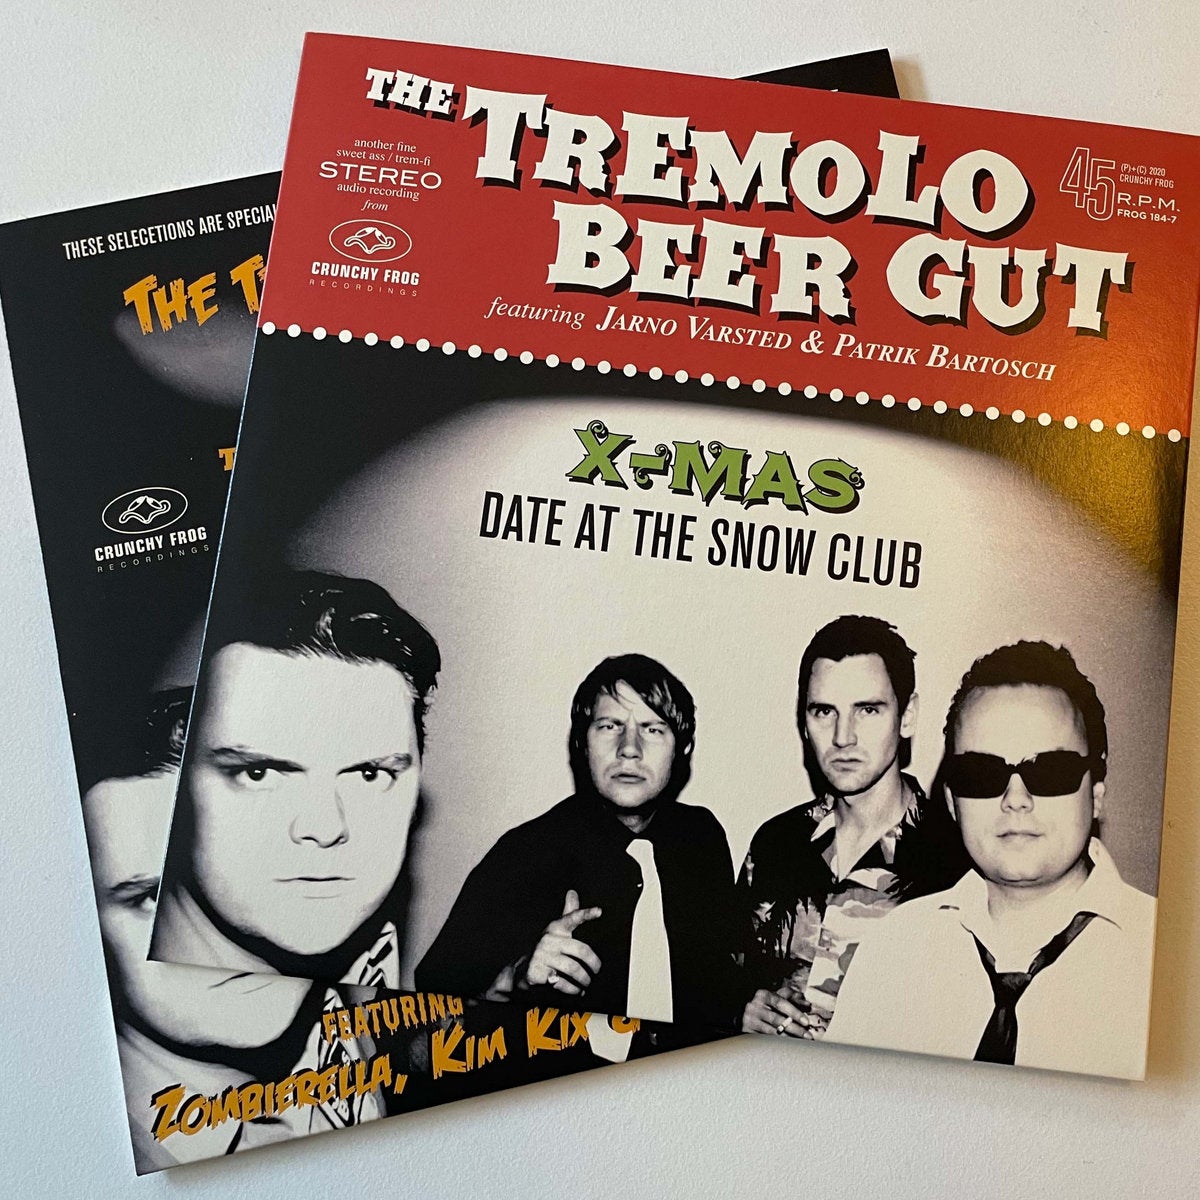 X-mas Date at The Snow Club b/w The Tremolo Death Wray (From The Guts Of Hell)